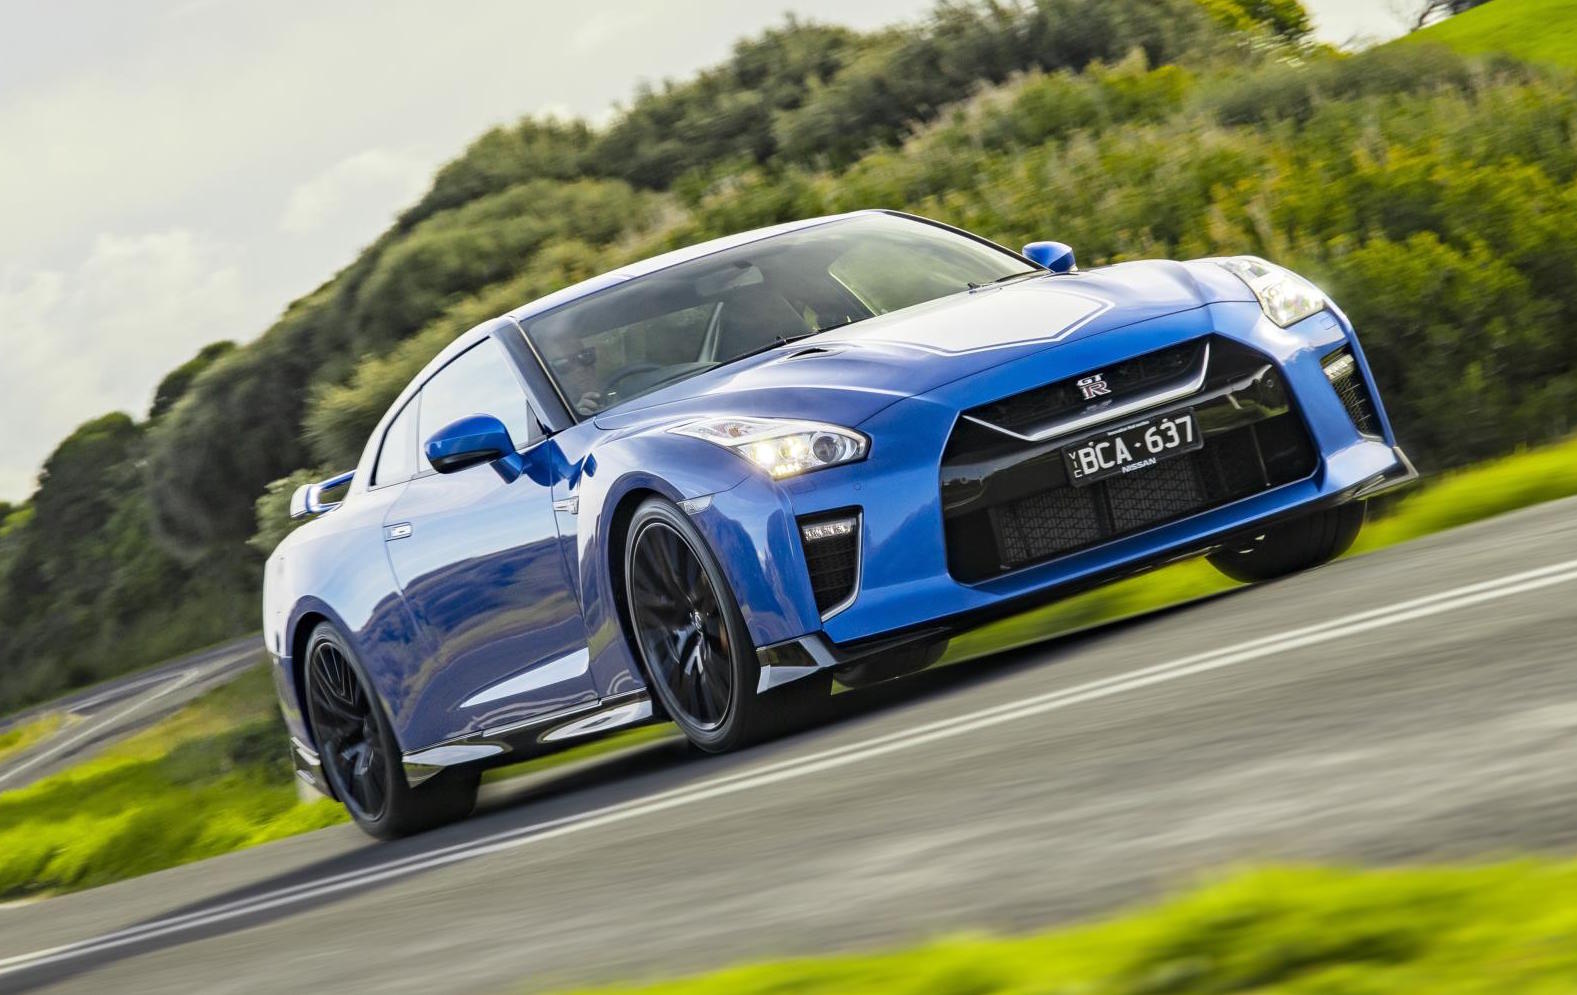 2020 Nissan GT-R now on sale in Australia, with 50th Anniversary edition